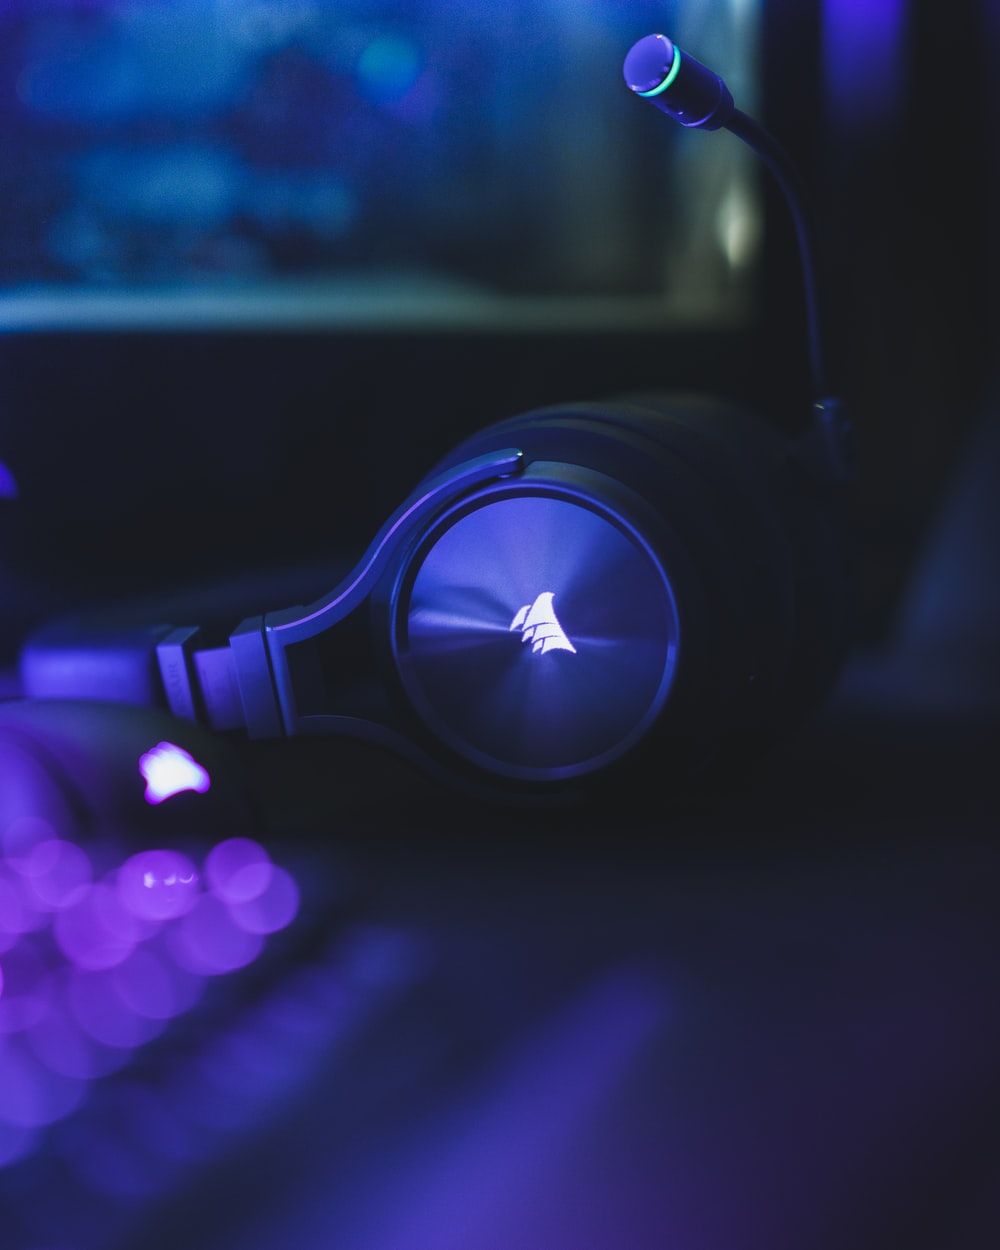 Gaming Headset Picture. Download Free Image